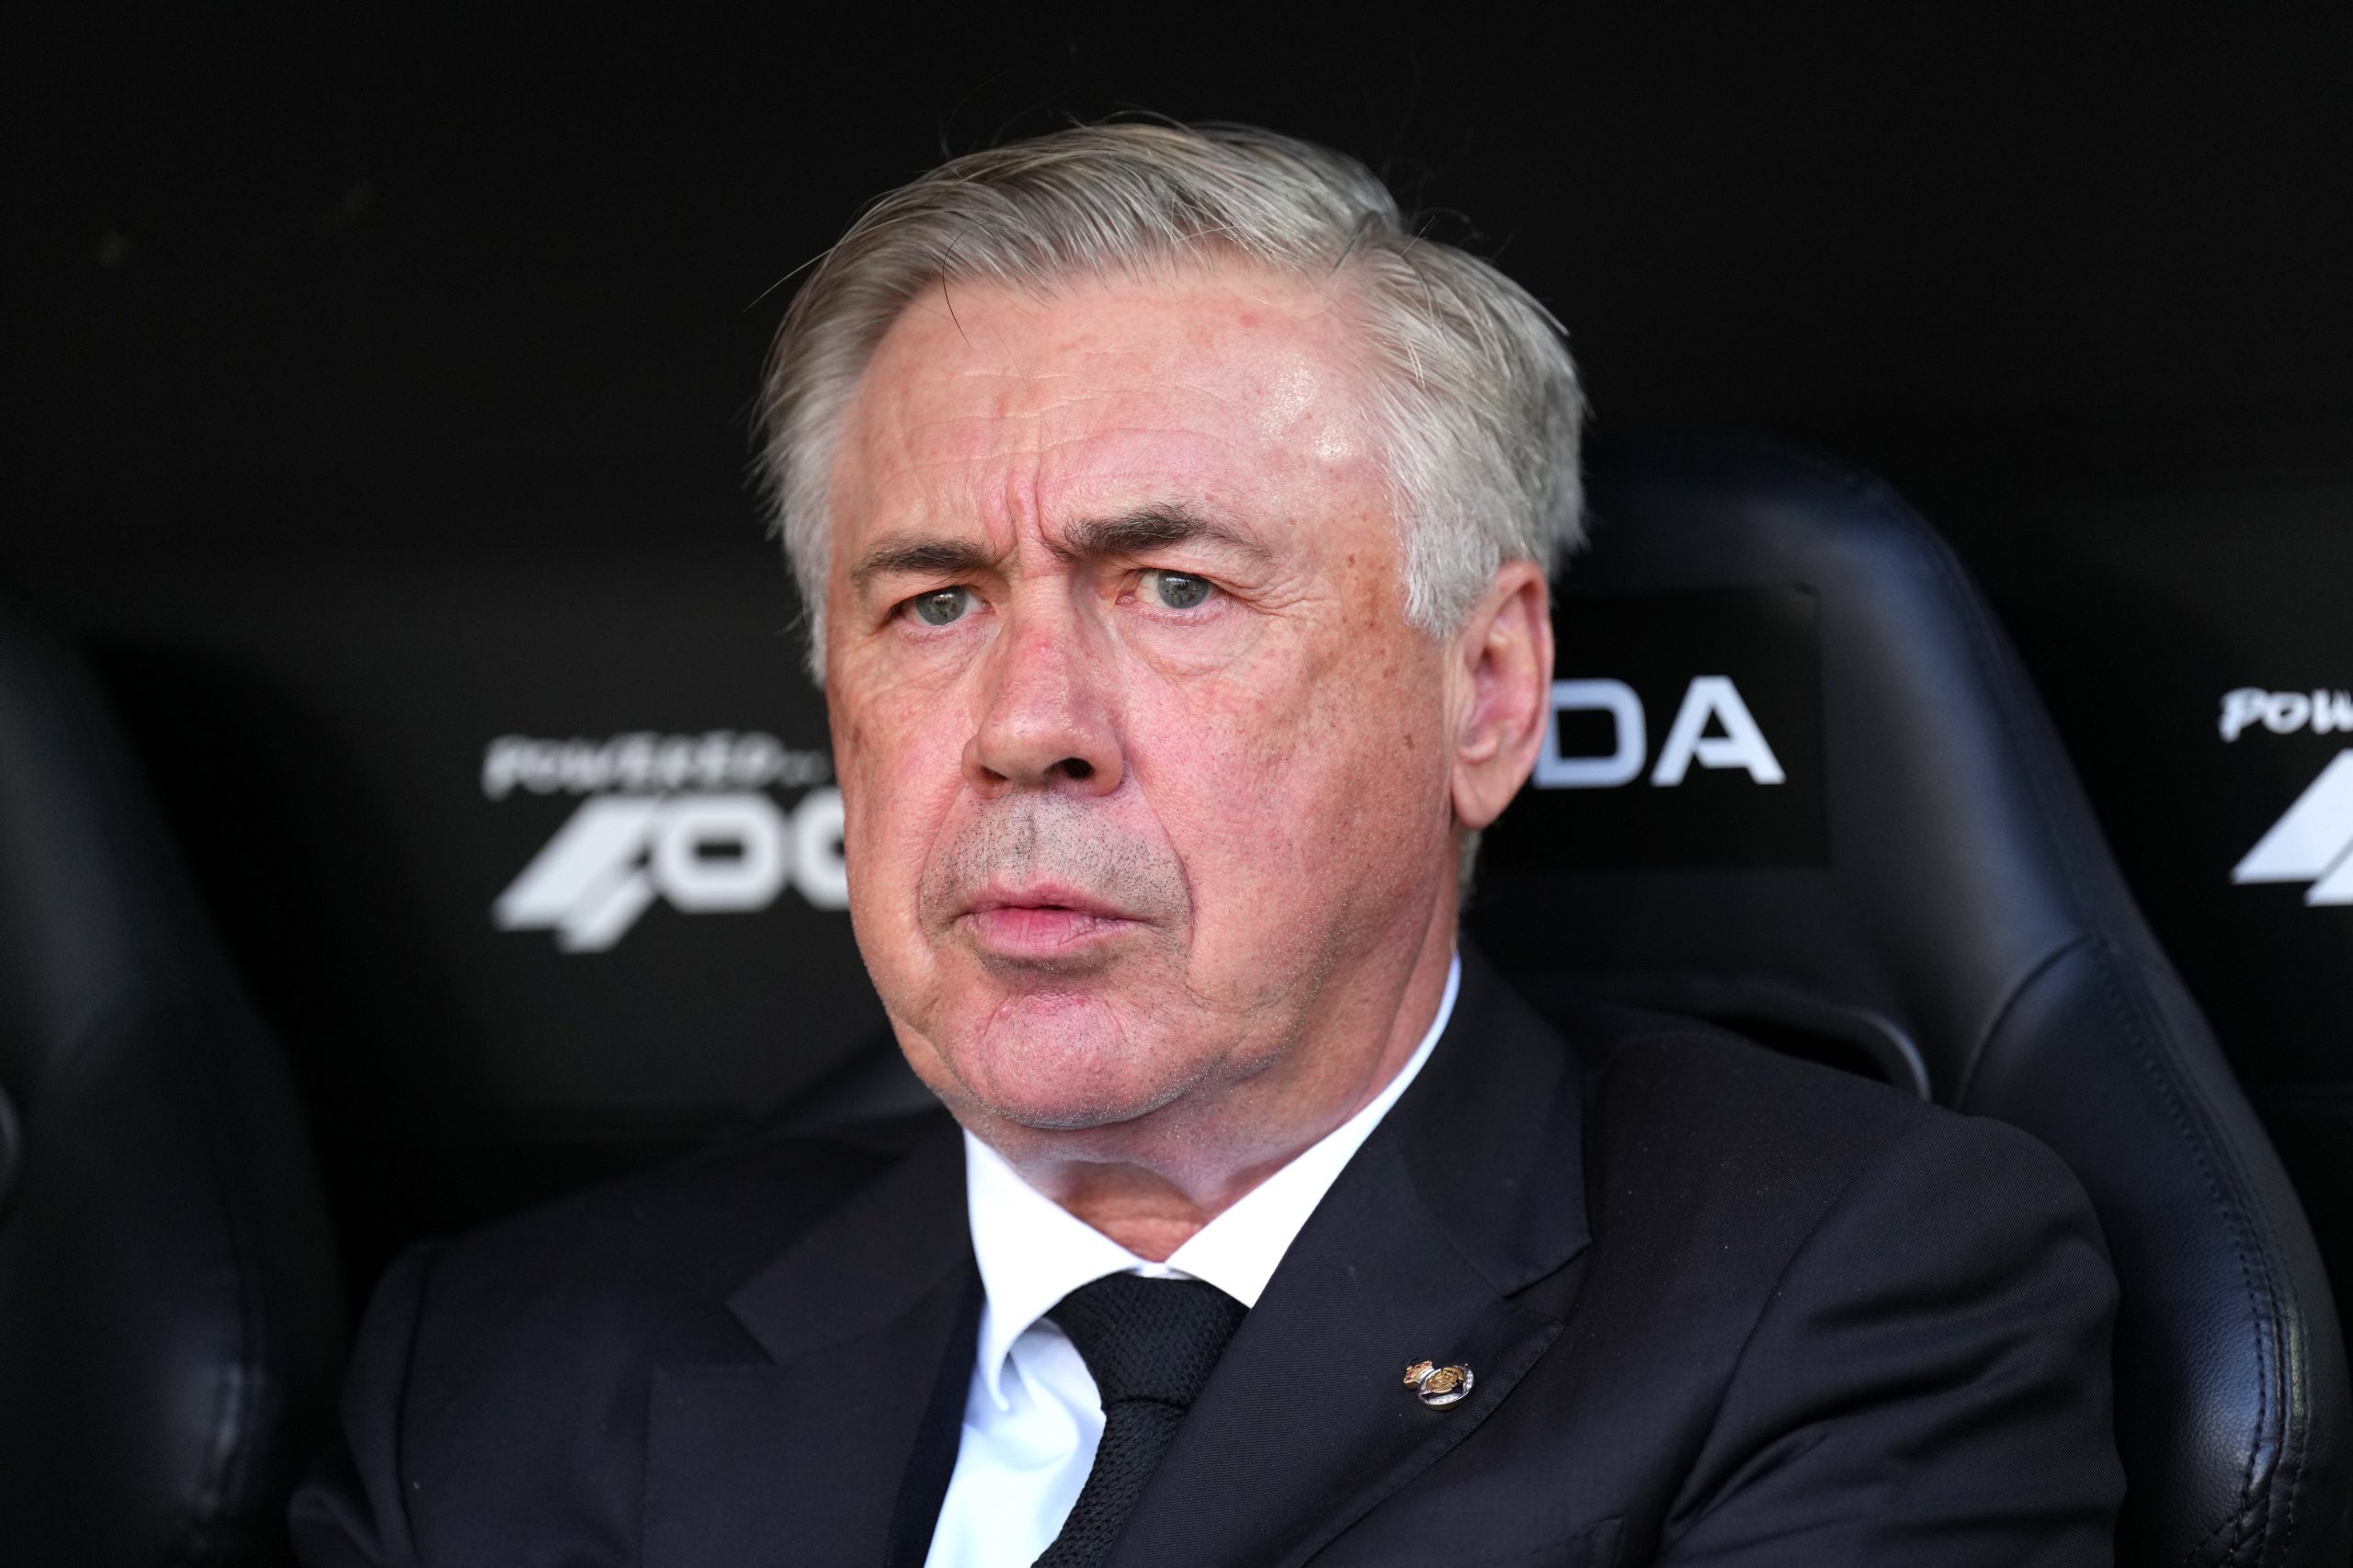 Official Carlo Ancelotti Renews With Real Madrid Until 2026